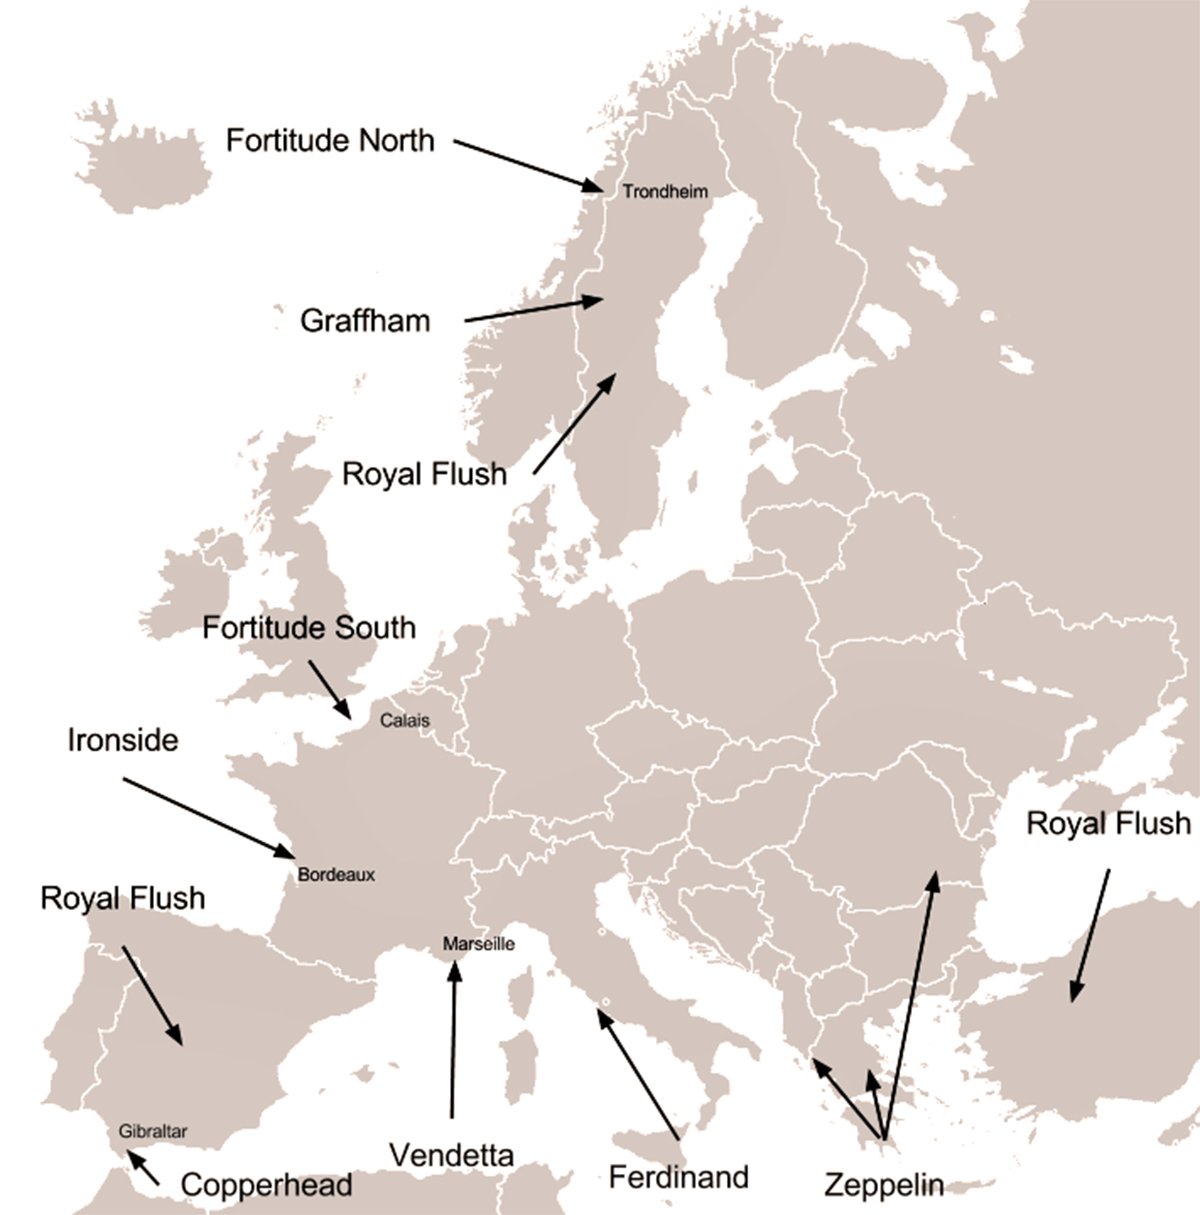 A map of Europe with black arrows pointing to different locations and labels such as “Fortitude North”, “Royal Flush”, and “Copperhead”. The map is in a light beige color. The map is a reference to military operations or manoeuvres on the D-Day invasion of Normandy.